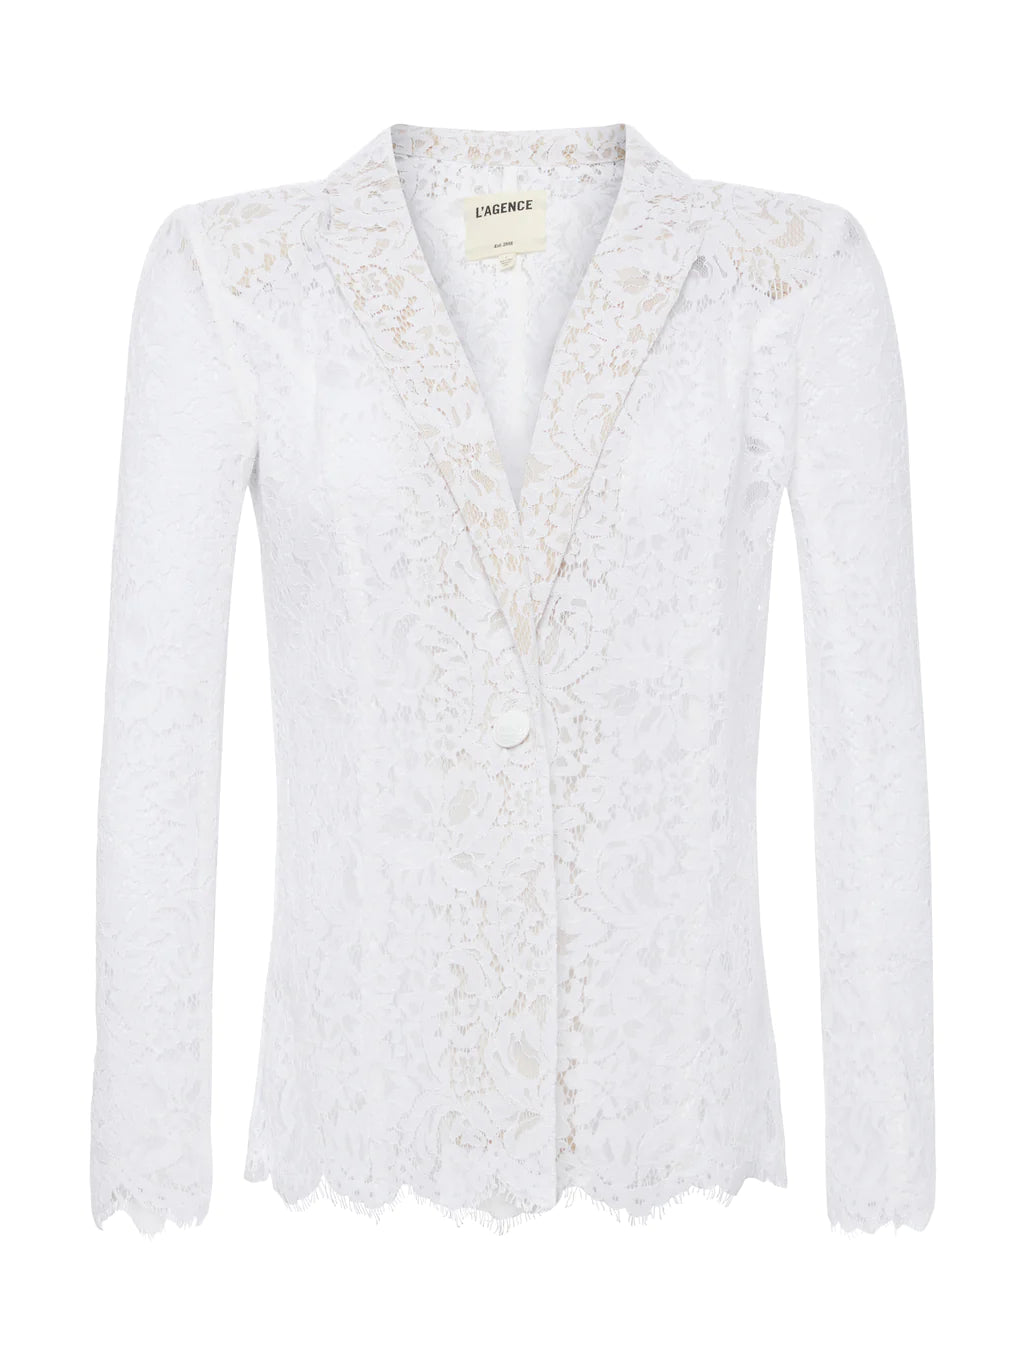 Clementine Blazer in White Lace by L'AGENCE